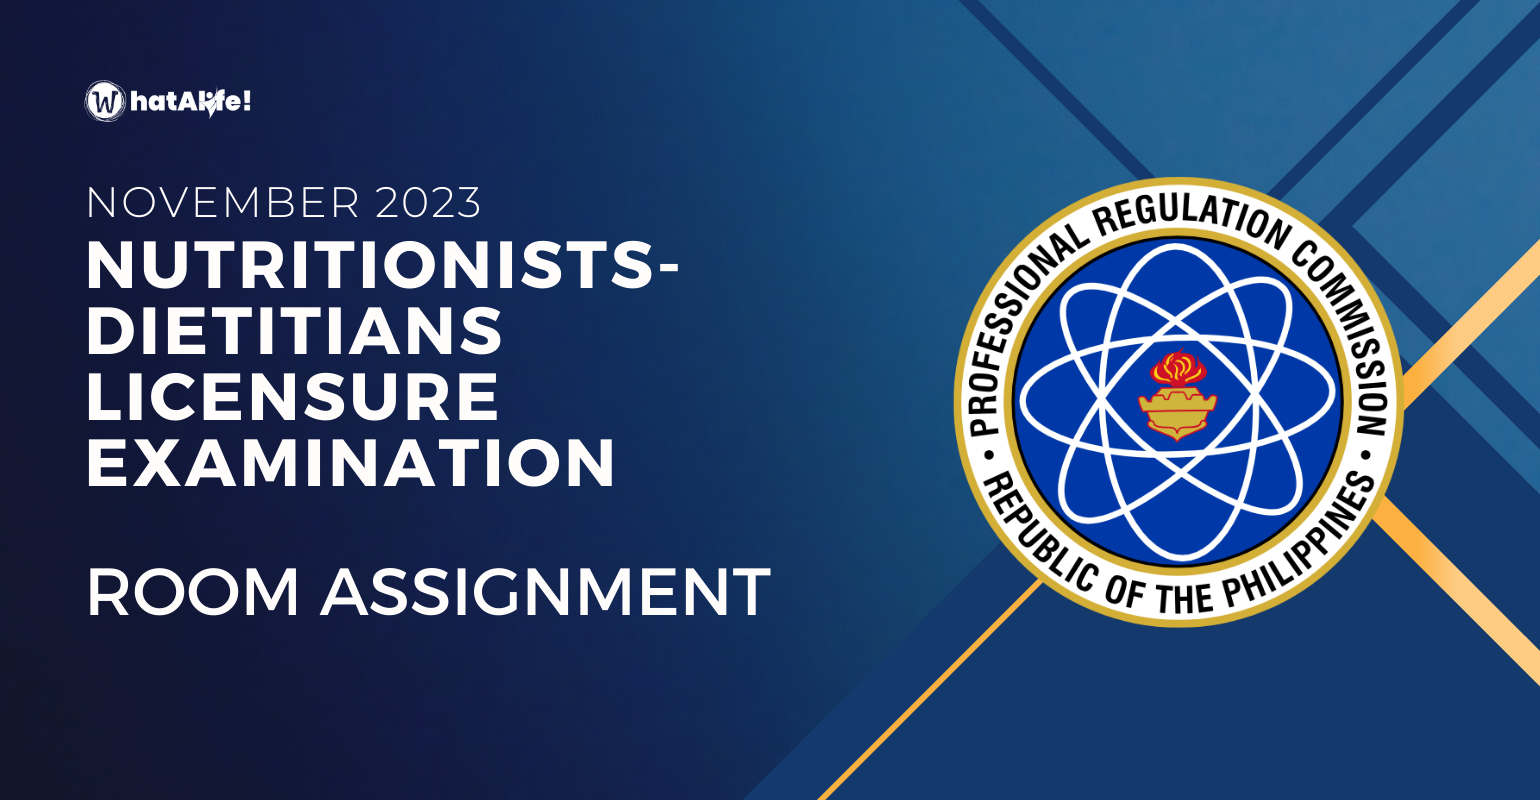 Room Assignment — November 2023 Nutritionists-Dietitians Licensure Exam